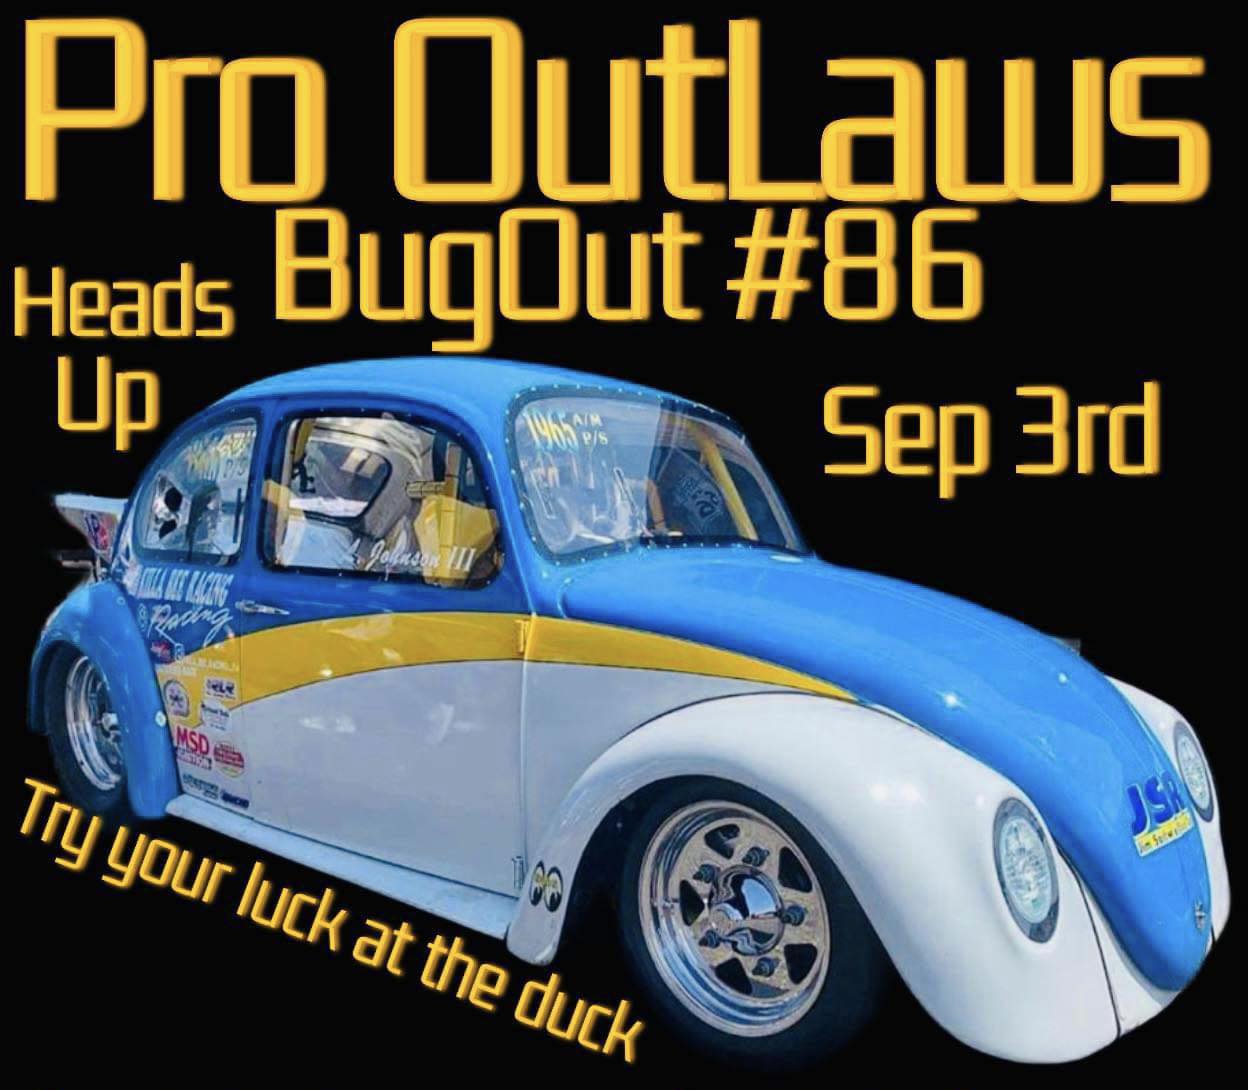 BugOut #86 – Pro Outlaw Registration